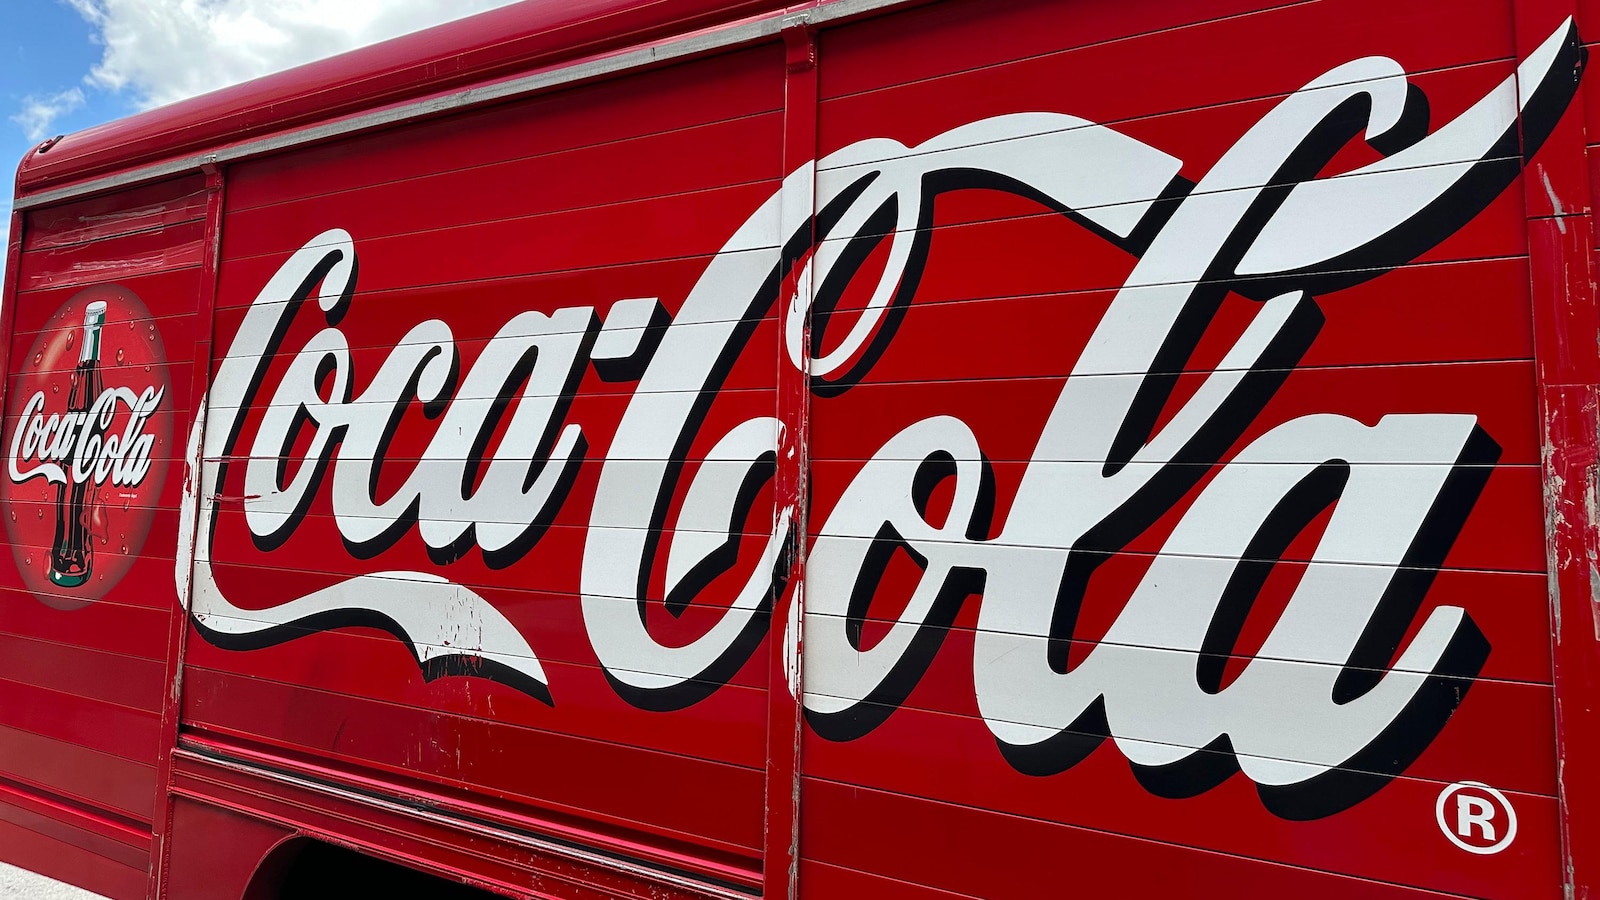 Coca-Cola raises full-year sales guidance after stronger-than-expected second quarter